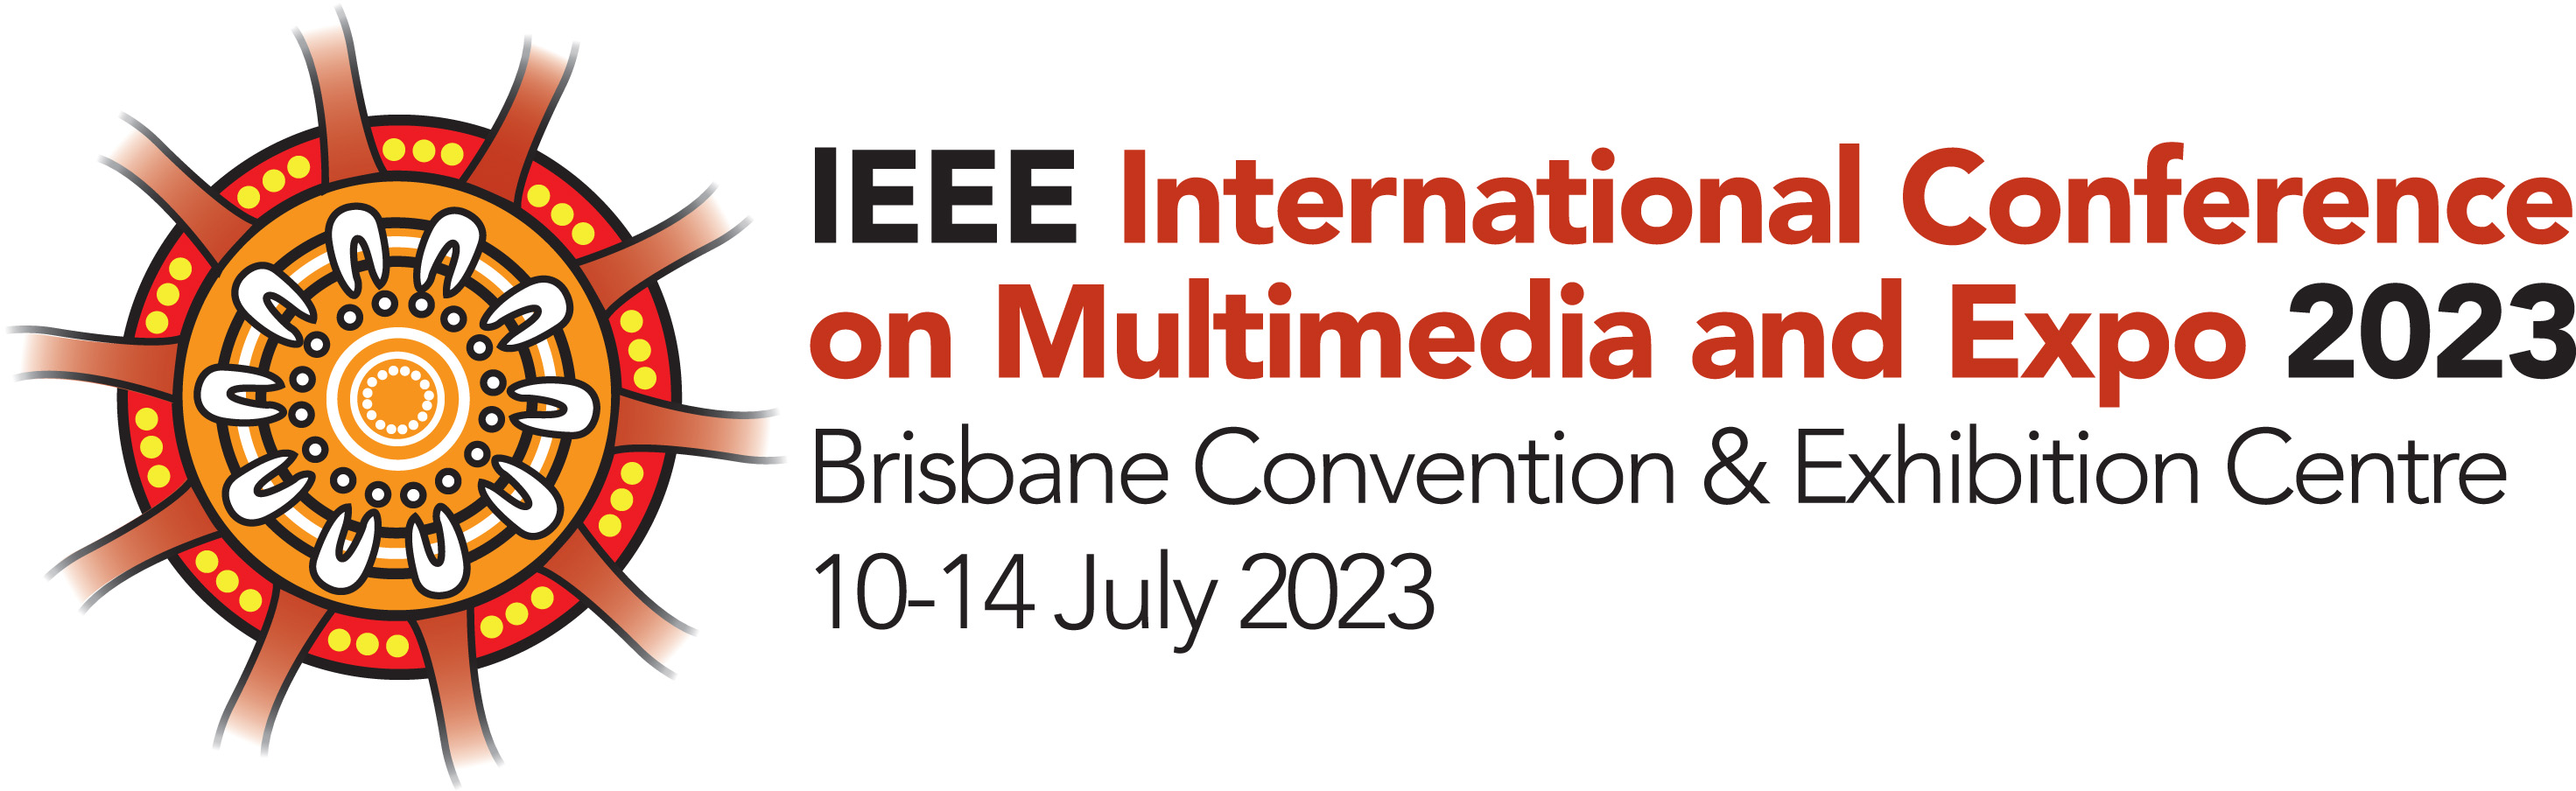 ICME 2023 (24th IEEE International Conference on Multimedia and Expo)